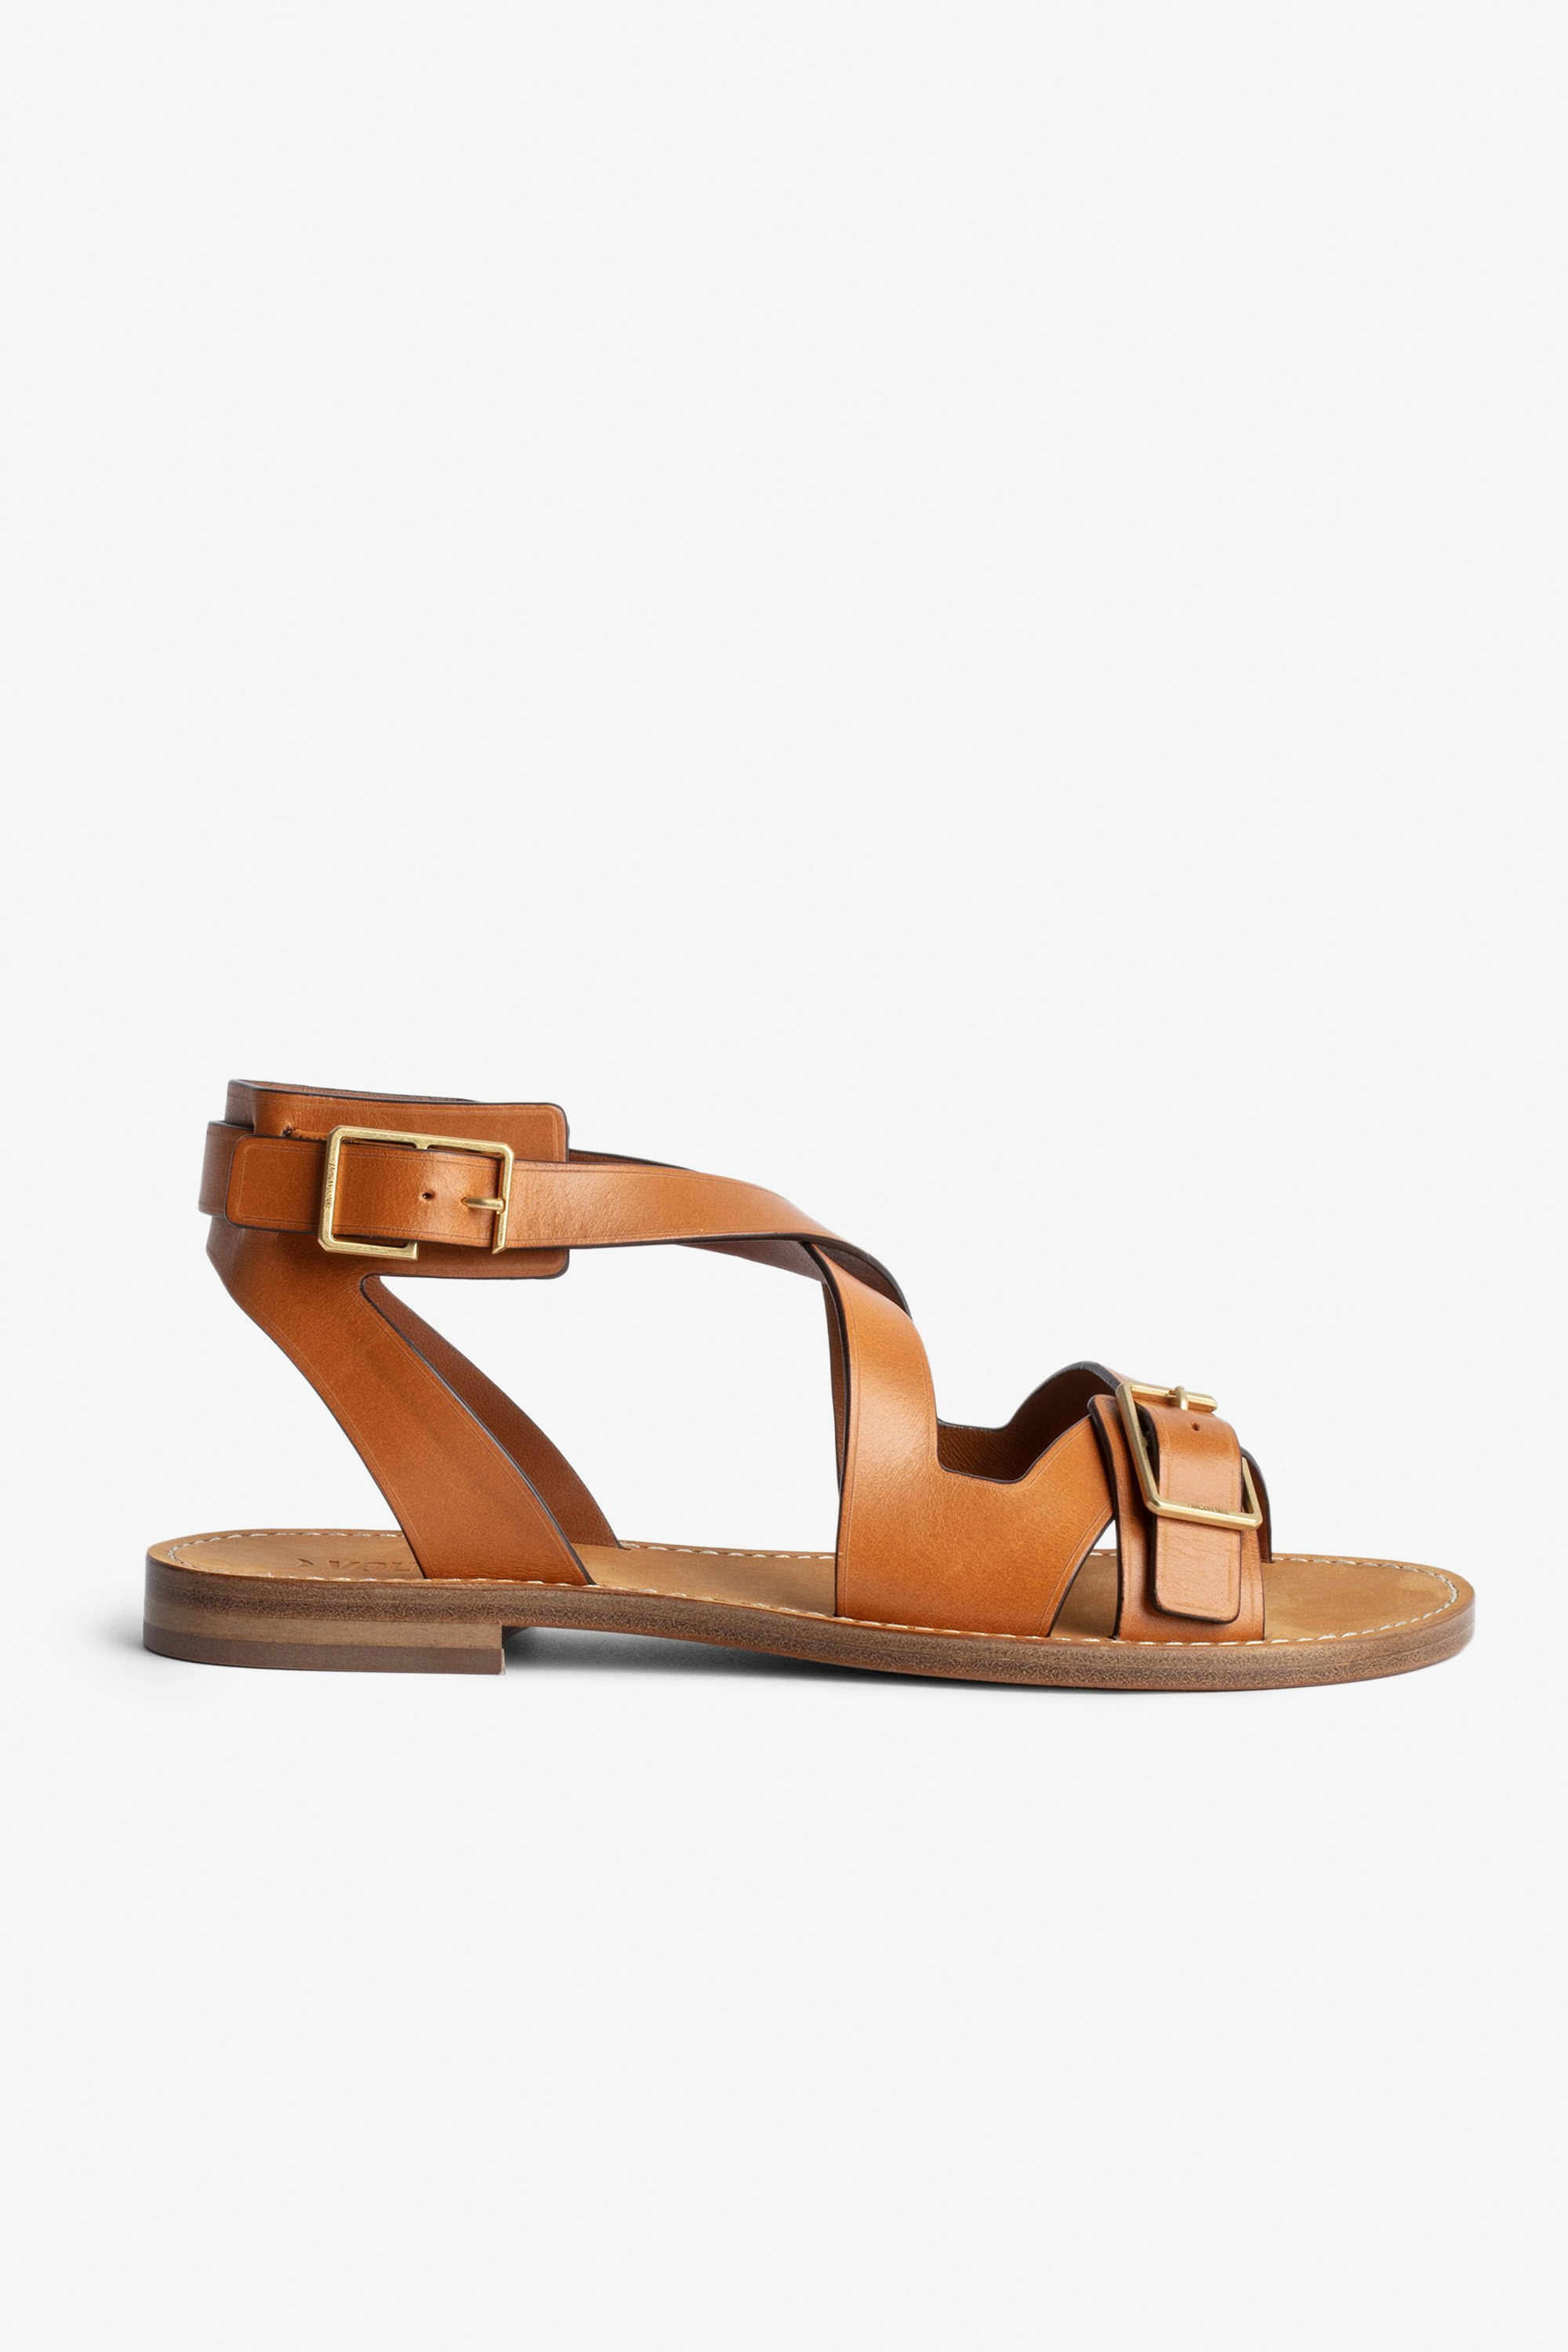 Cecilia Caprese Sandals - Women's leather sandals with straps and C-shaped buckles